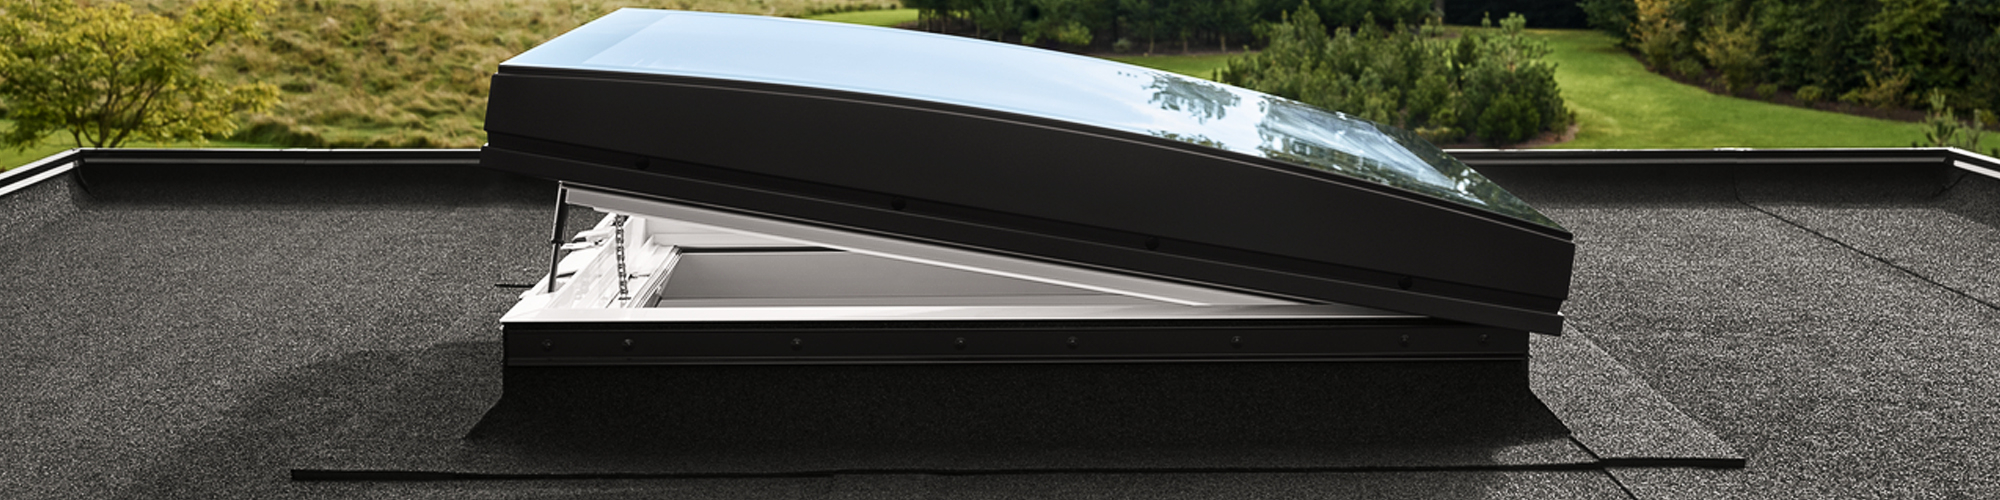 flat roofing, velux flat roof, chester flat roof window, flat window